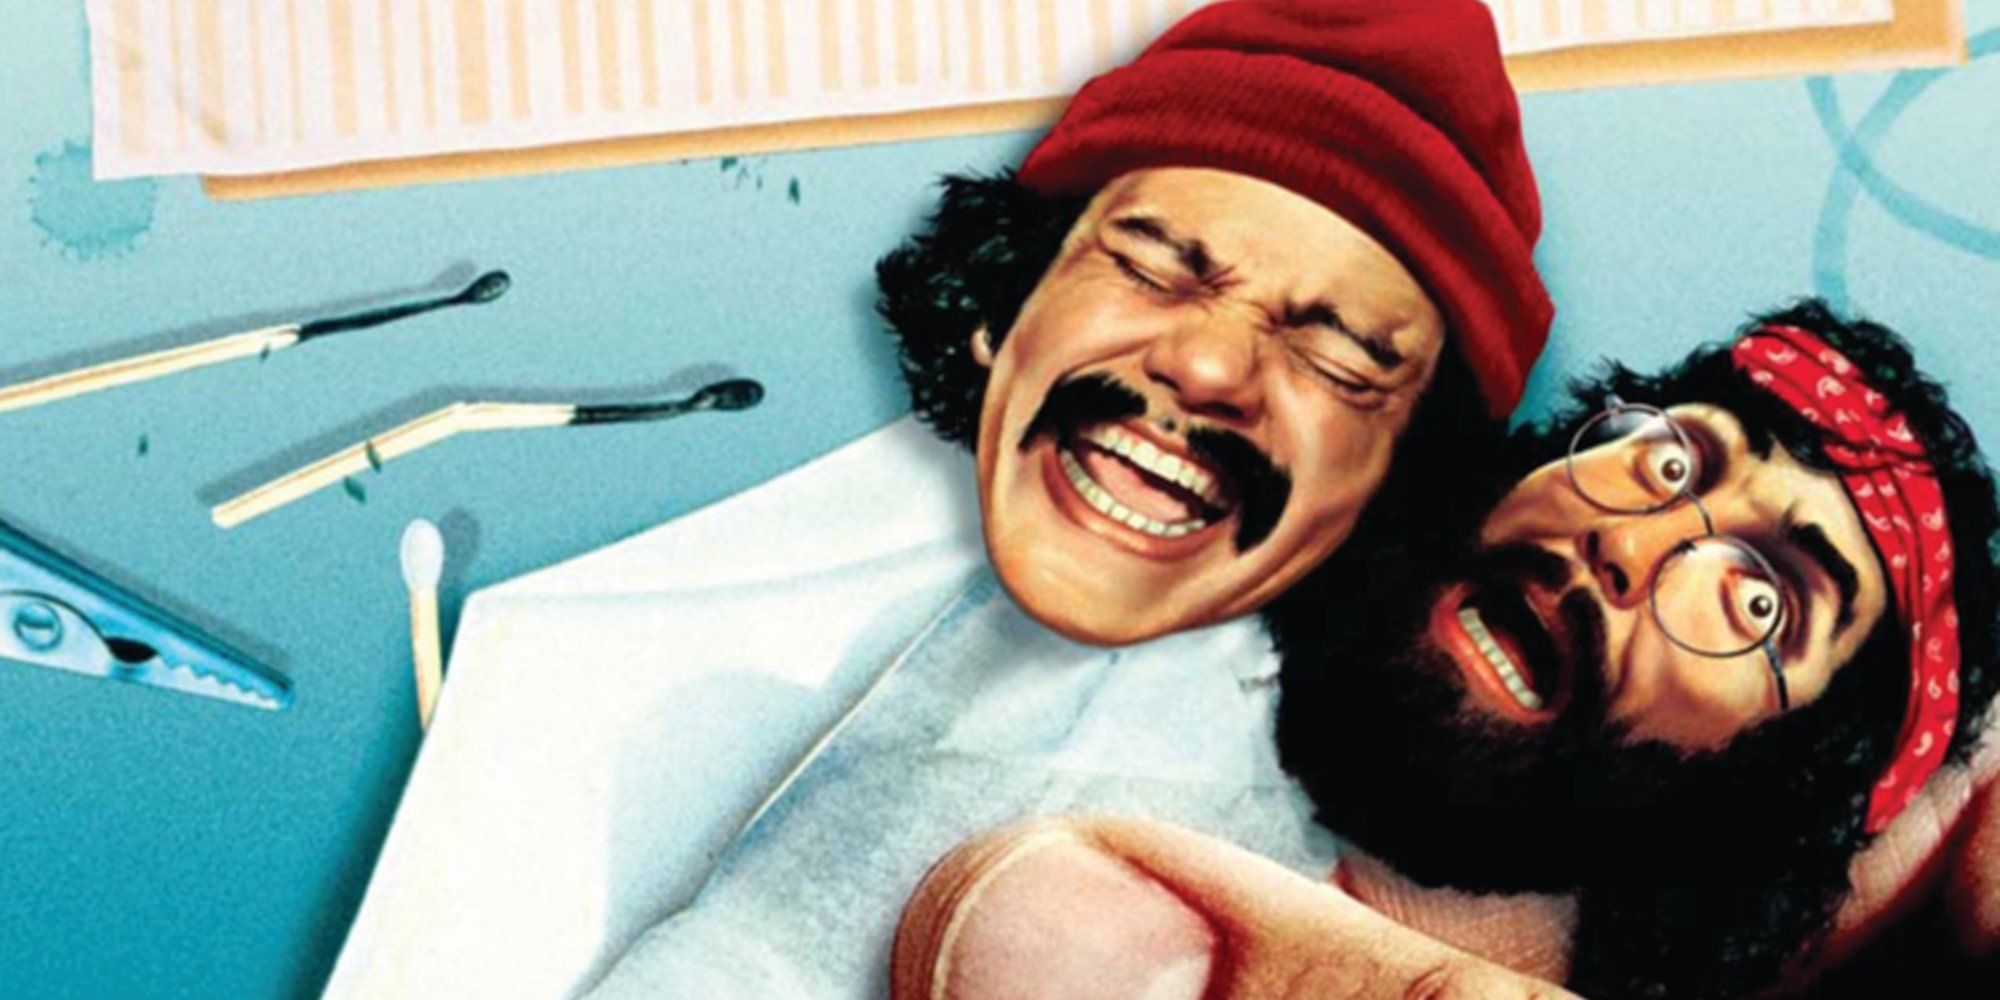 Vote up the funniest cheech & chong films and vote down the ones you di...